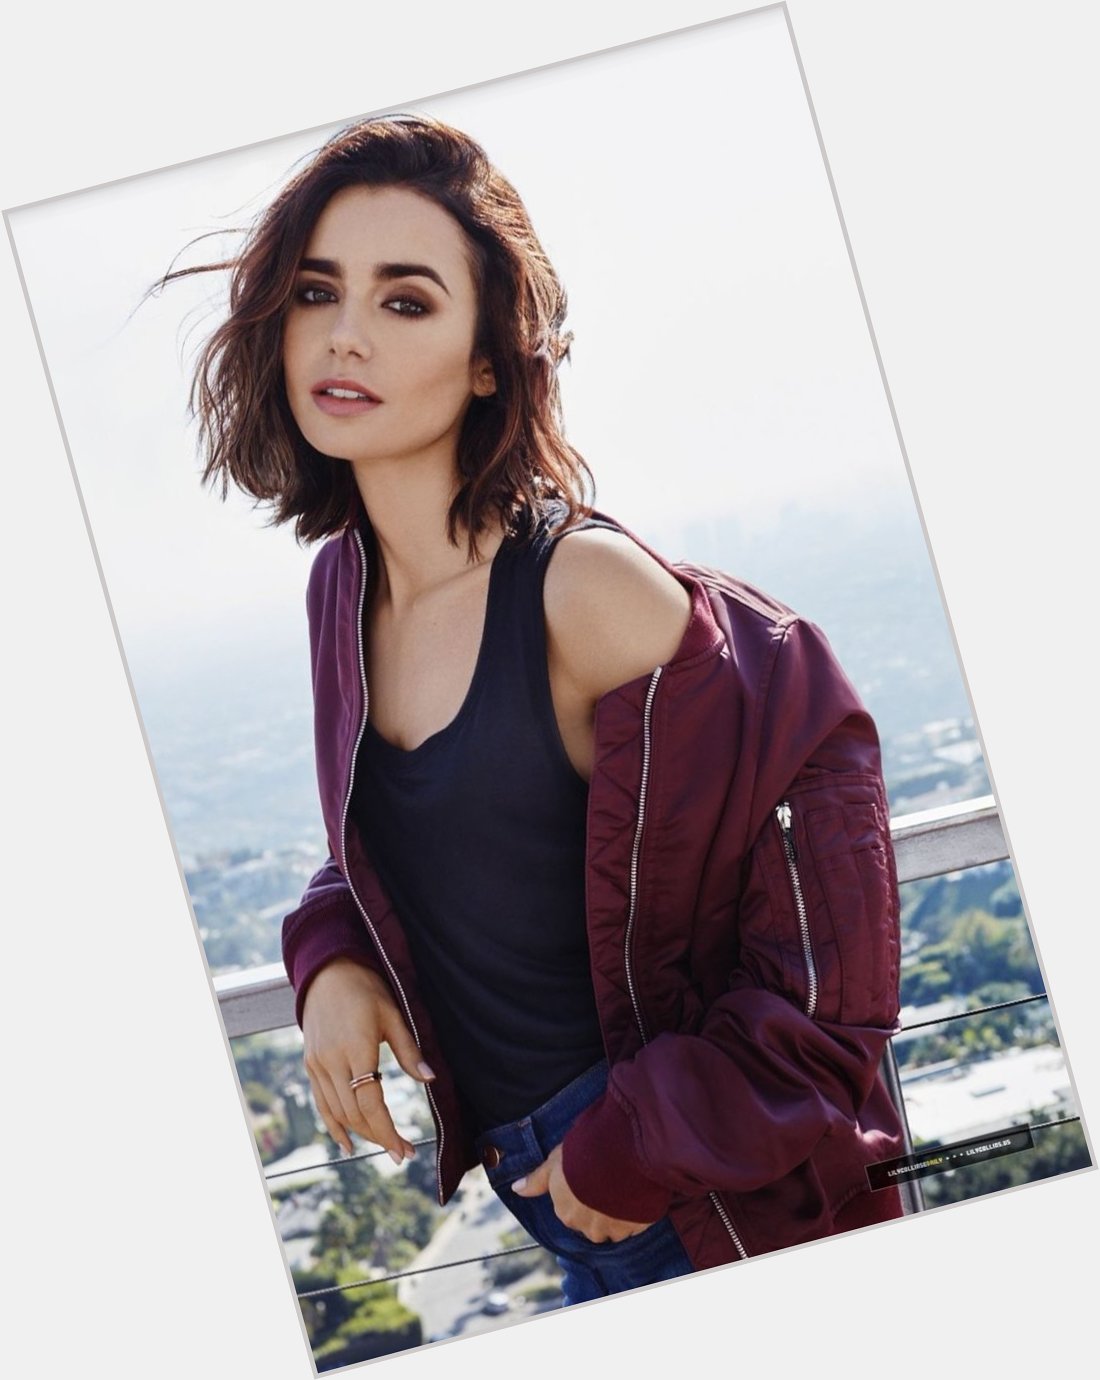 Happy 30th Birthday to one of my favorite people in the world, Lily Collins!  